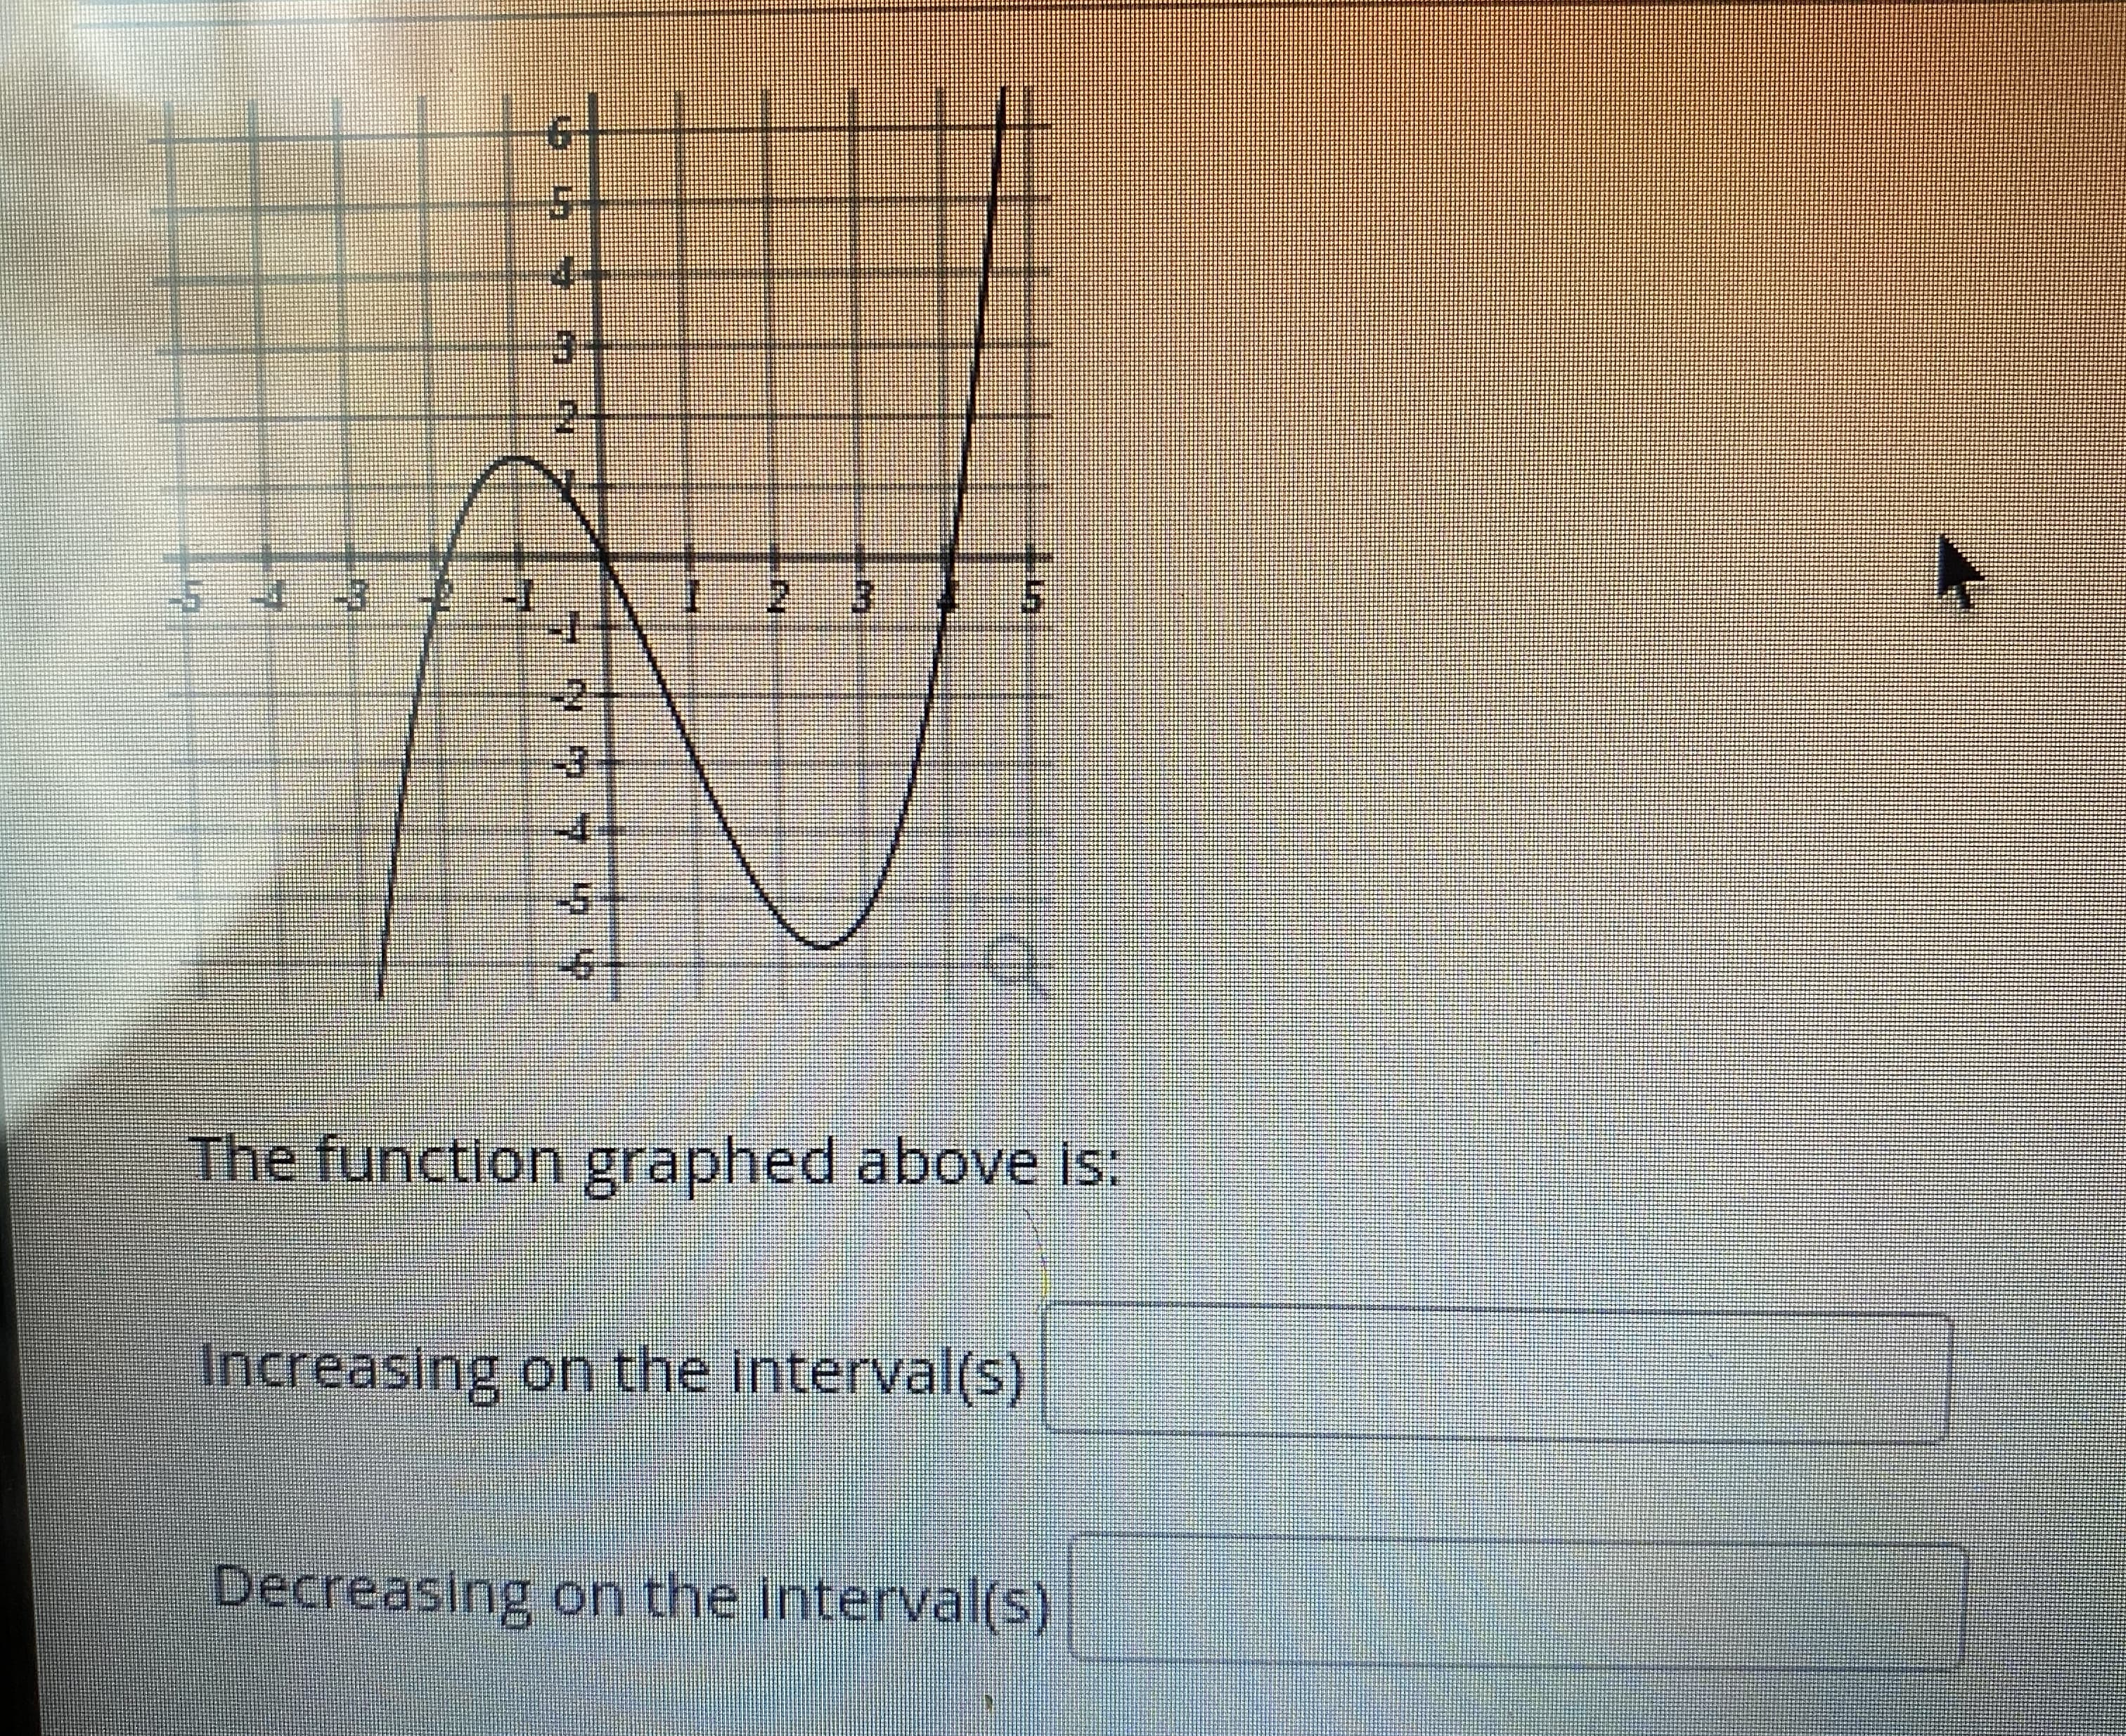 Increasing on the Interval(s)
Decreasing on the interval(s)
